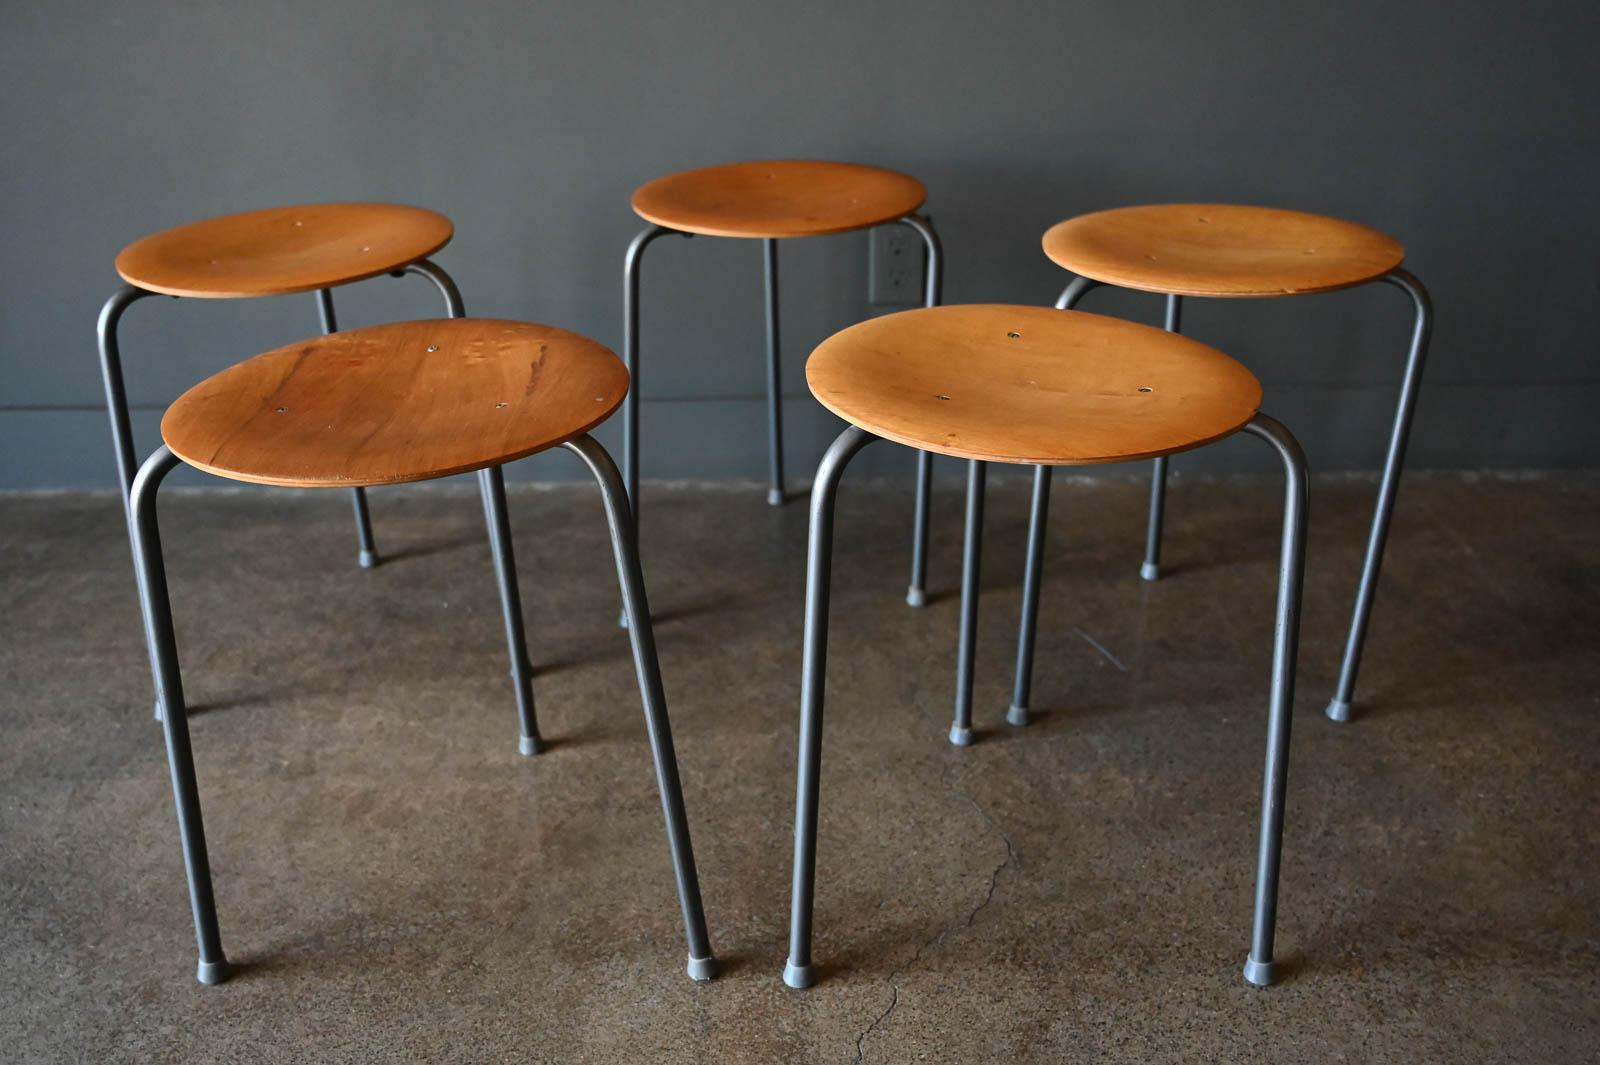 Vintage Arne Jacobsen dot stools in teak, circa 1960. Sold individually, good condition with grey leg finish and floor protectors. Stamped on underside. Measures 12